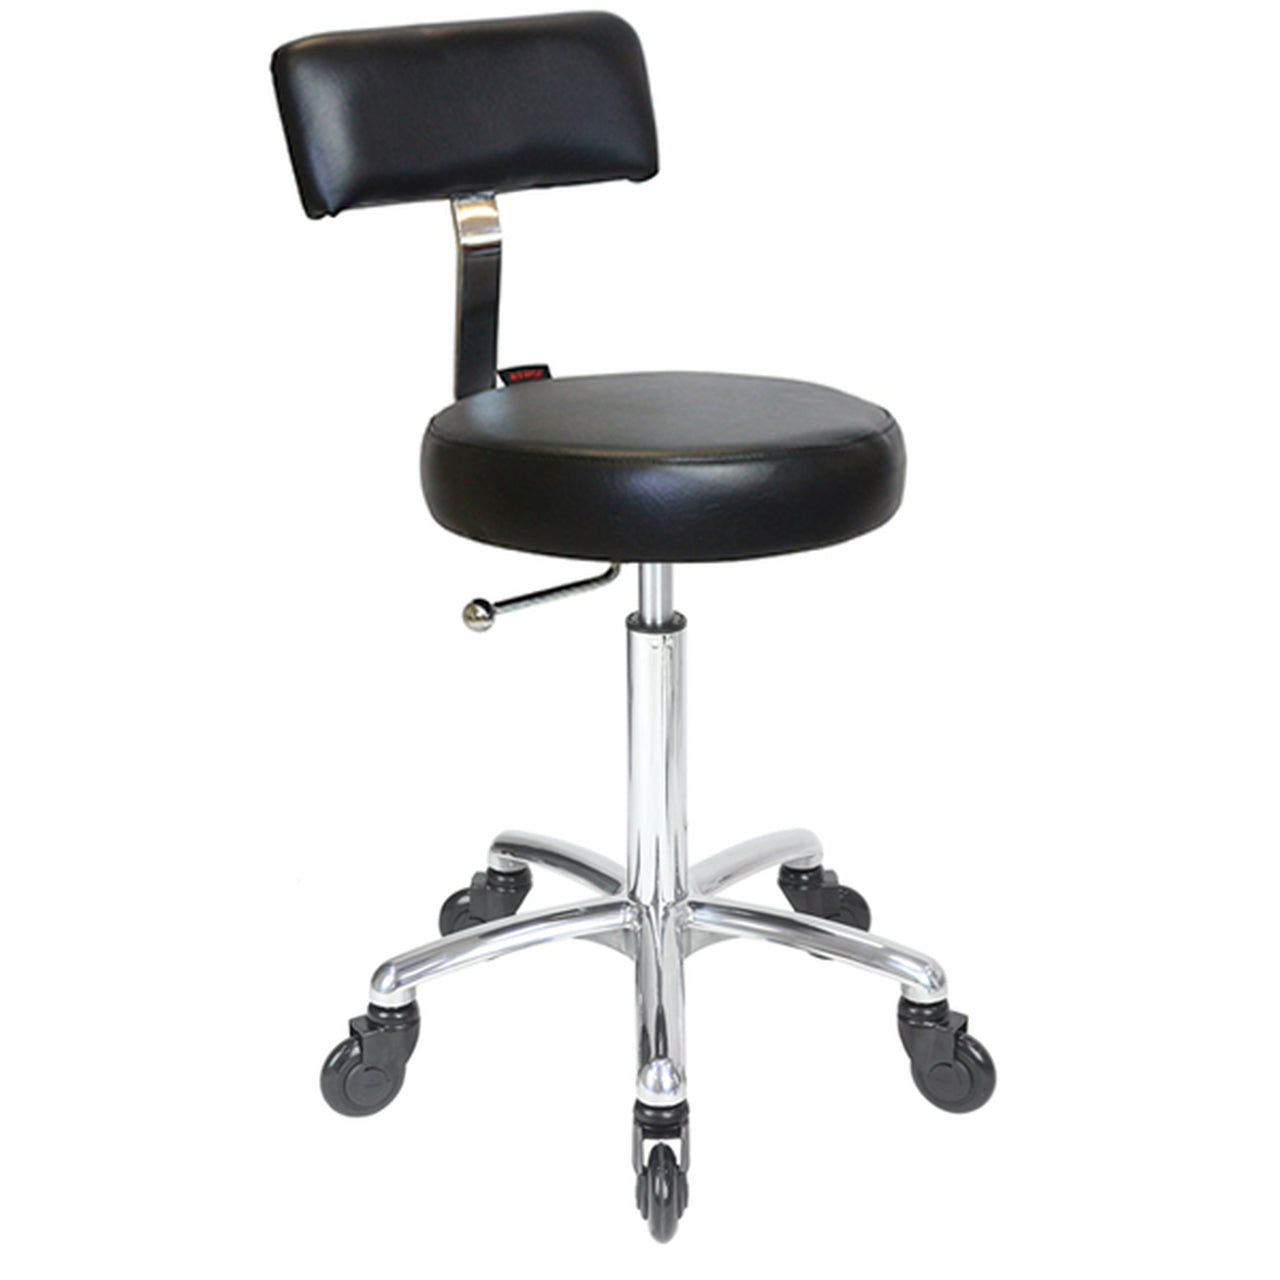 Sprint - Chrome Base - (Black Upholstery)   With CLICK'NCLEAN Castors